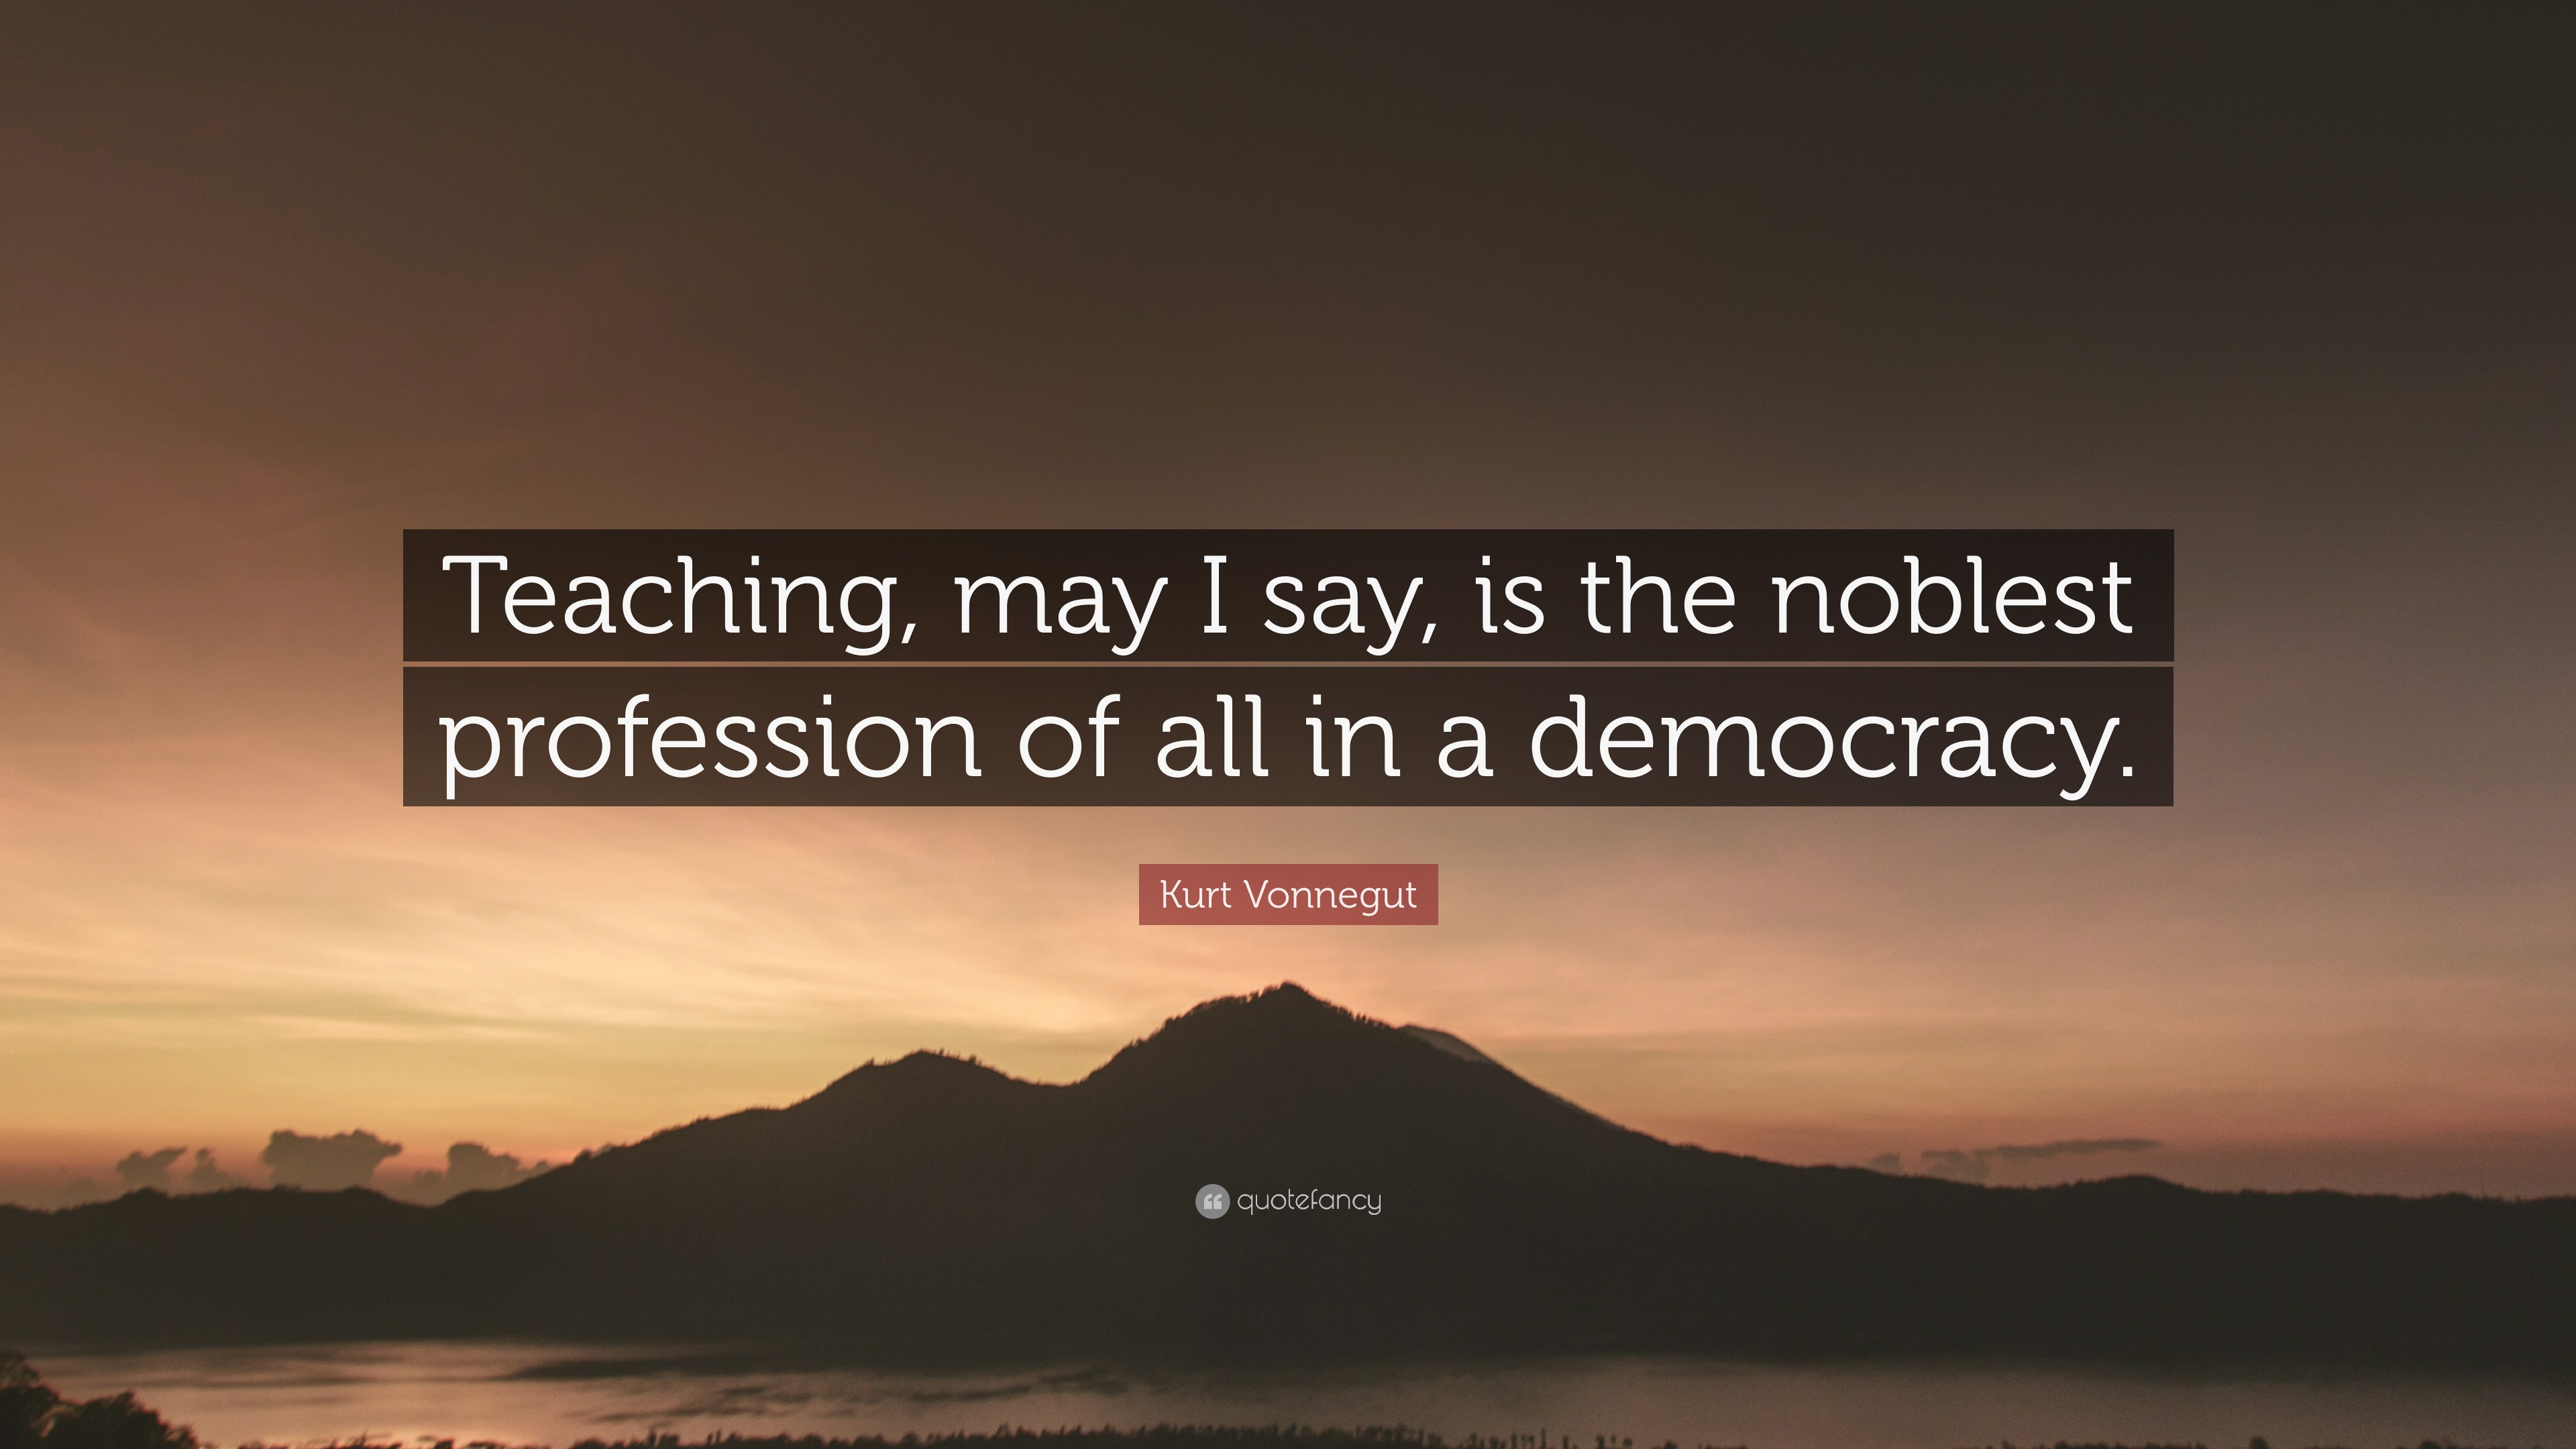 teaching is the noblest profession research paper